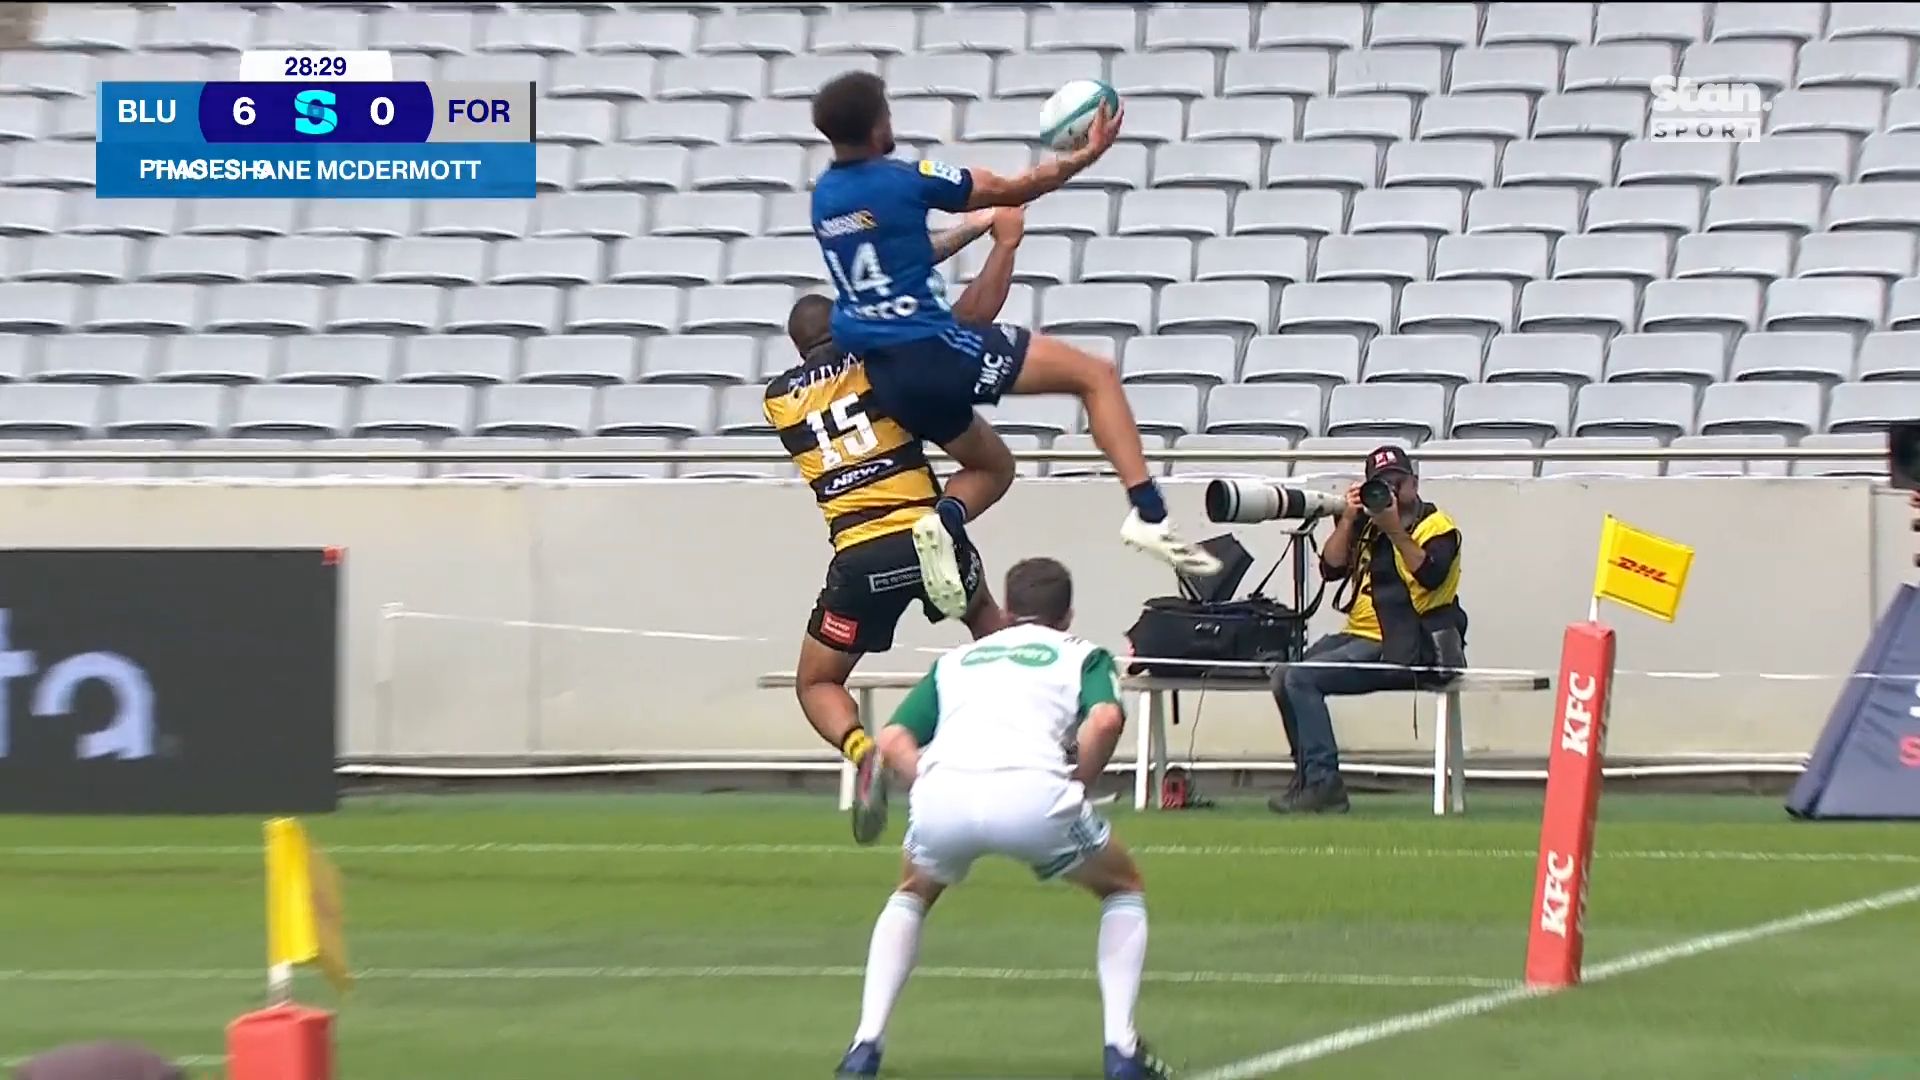 'That is going viral': Blues star stuns commentators with 'freakish' aerial try